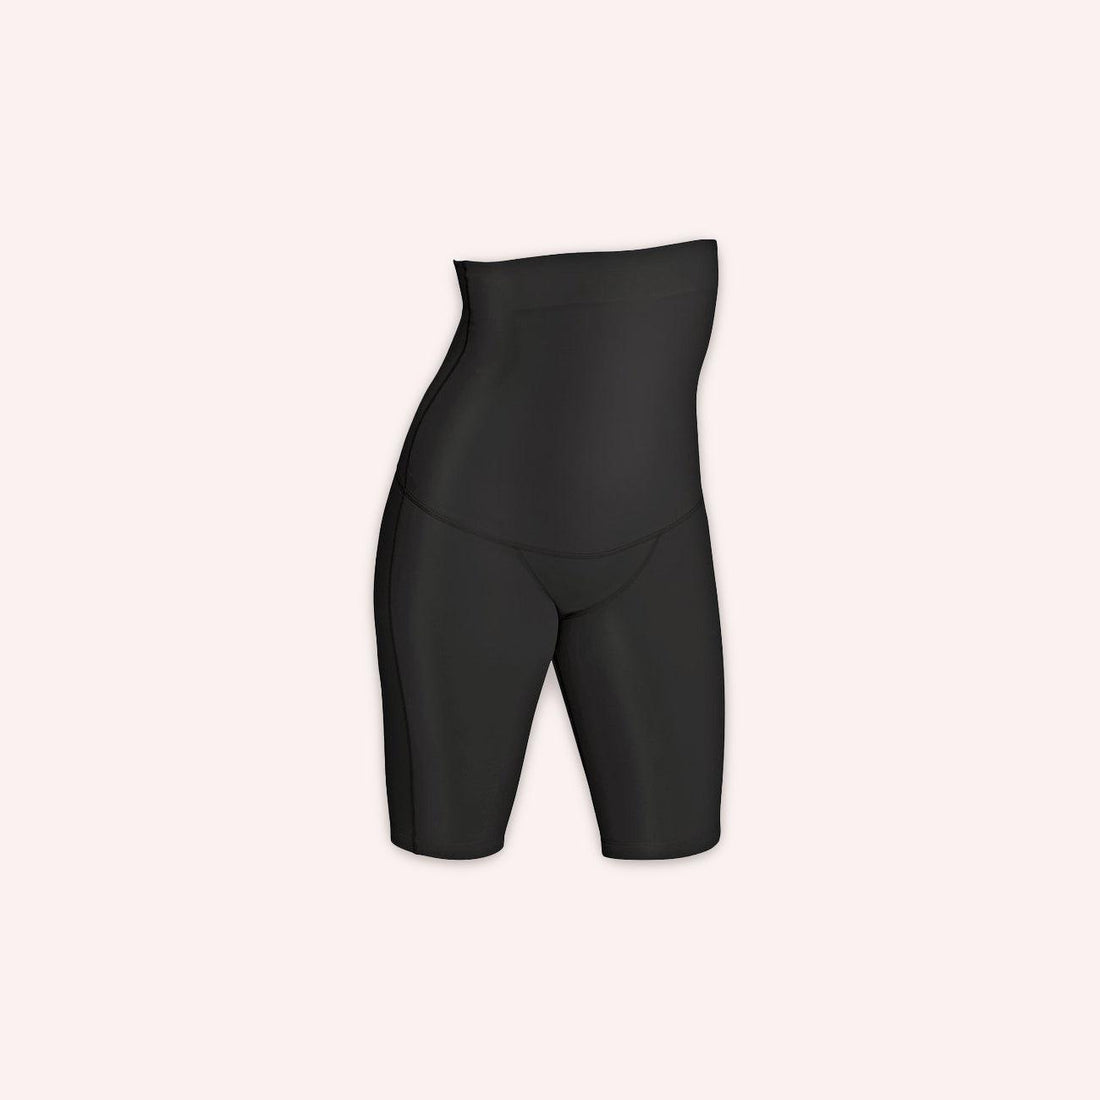 SRC Recovery Shorts - Black by SRC Health